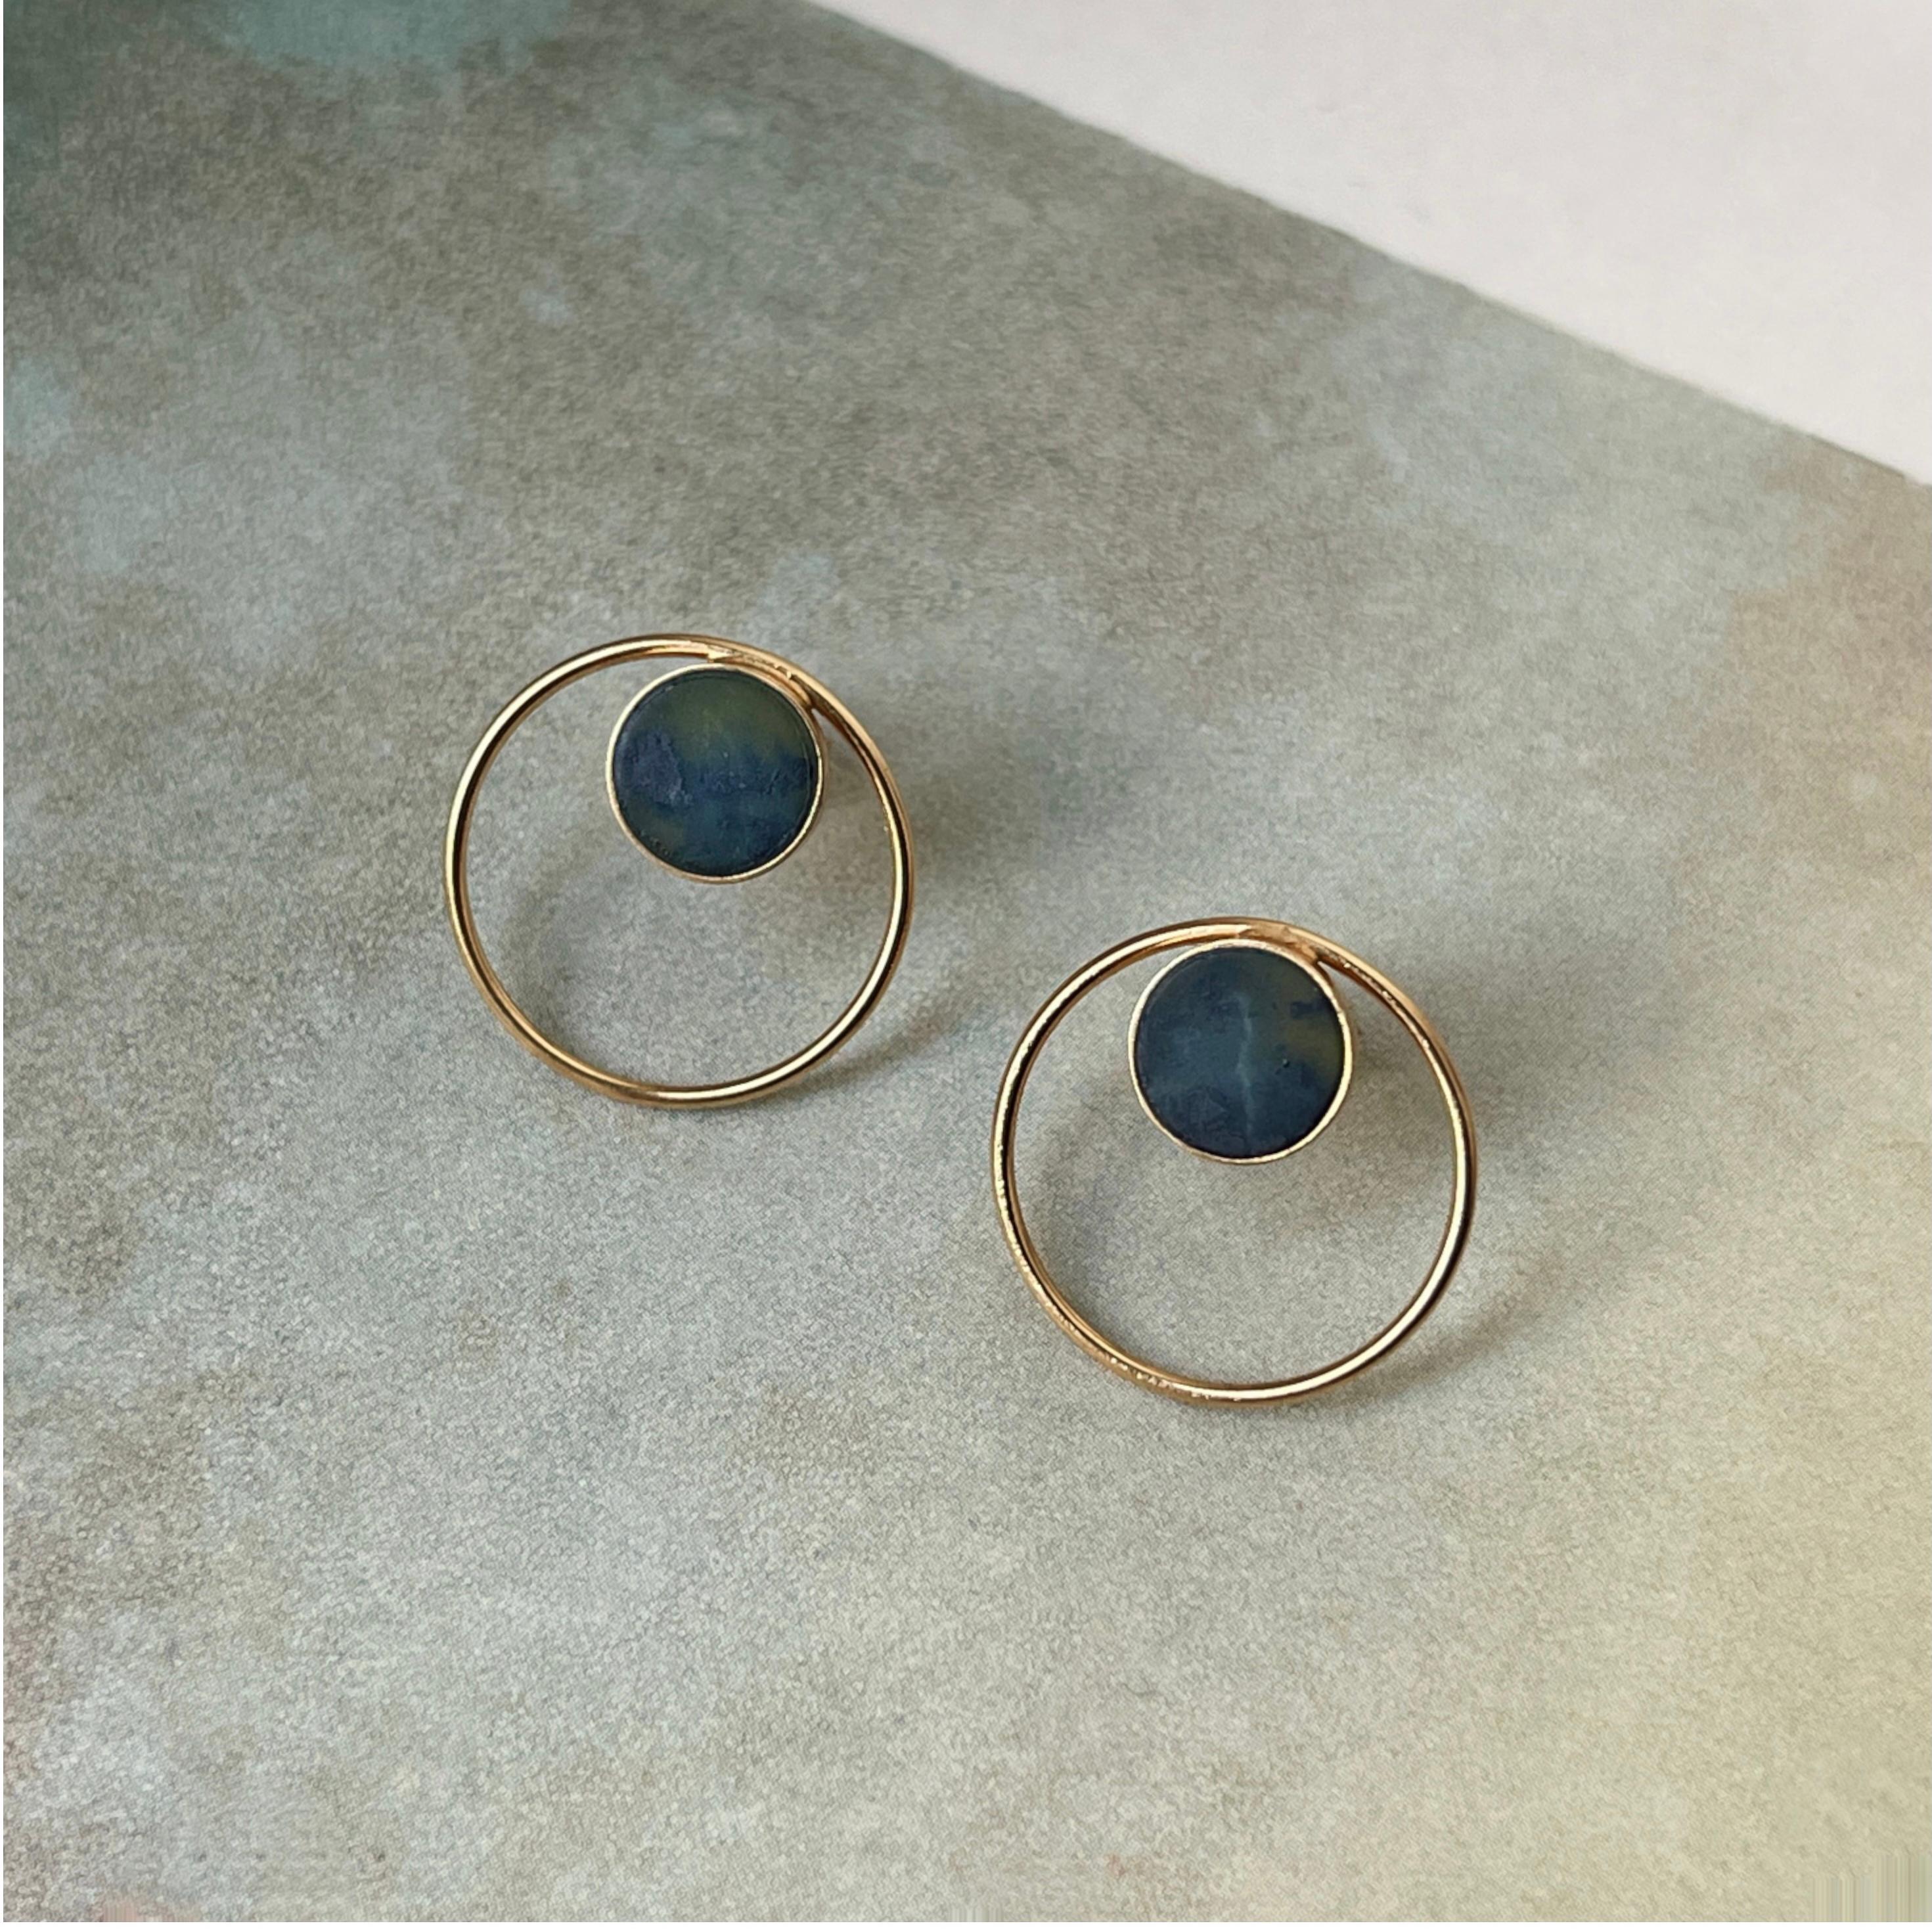 The earrings with a beautiful dark green stone are part of a collection whose leitmotif is the perfection of the circle shape. It symbolises completeness, harmony and femininity. Add an extra touch to your look with these simple yet extraordinary